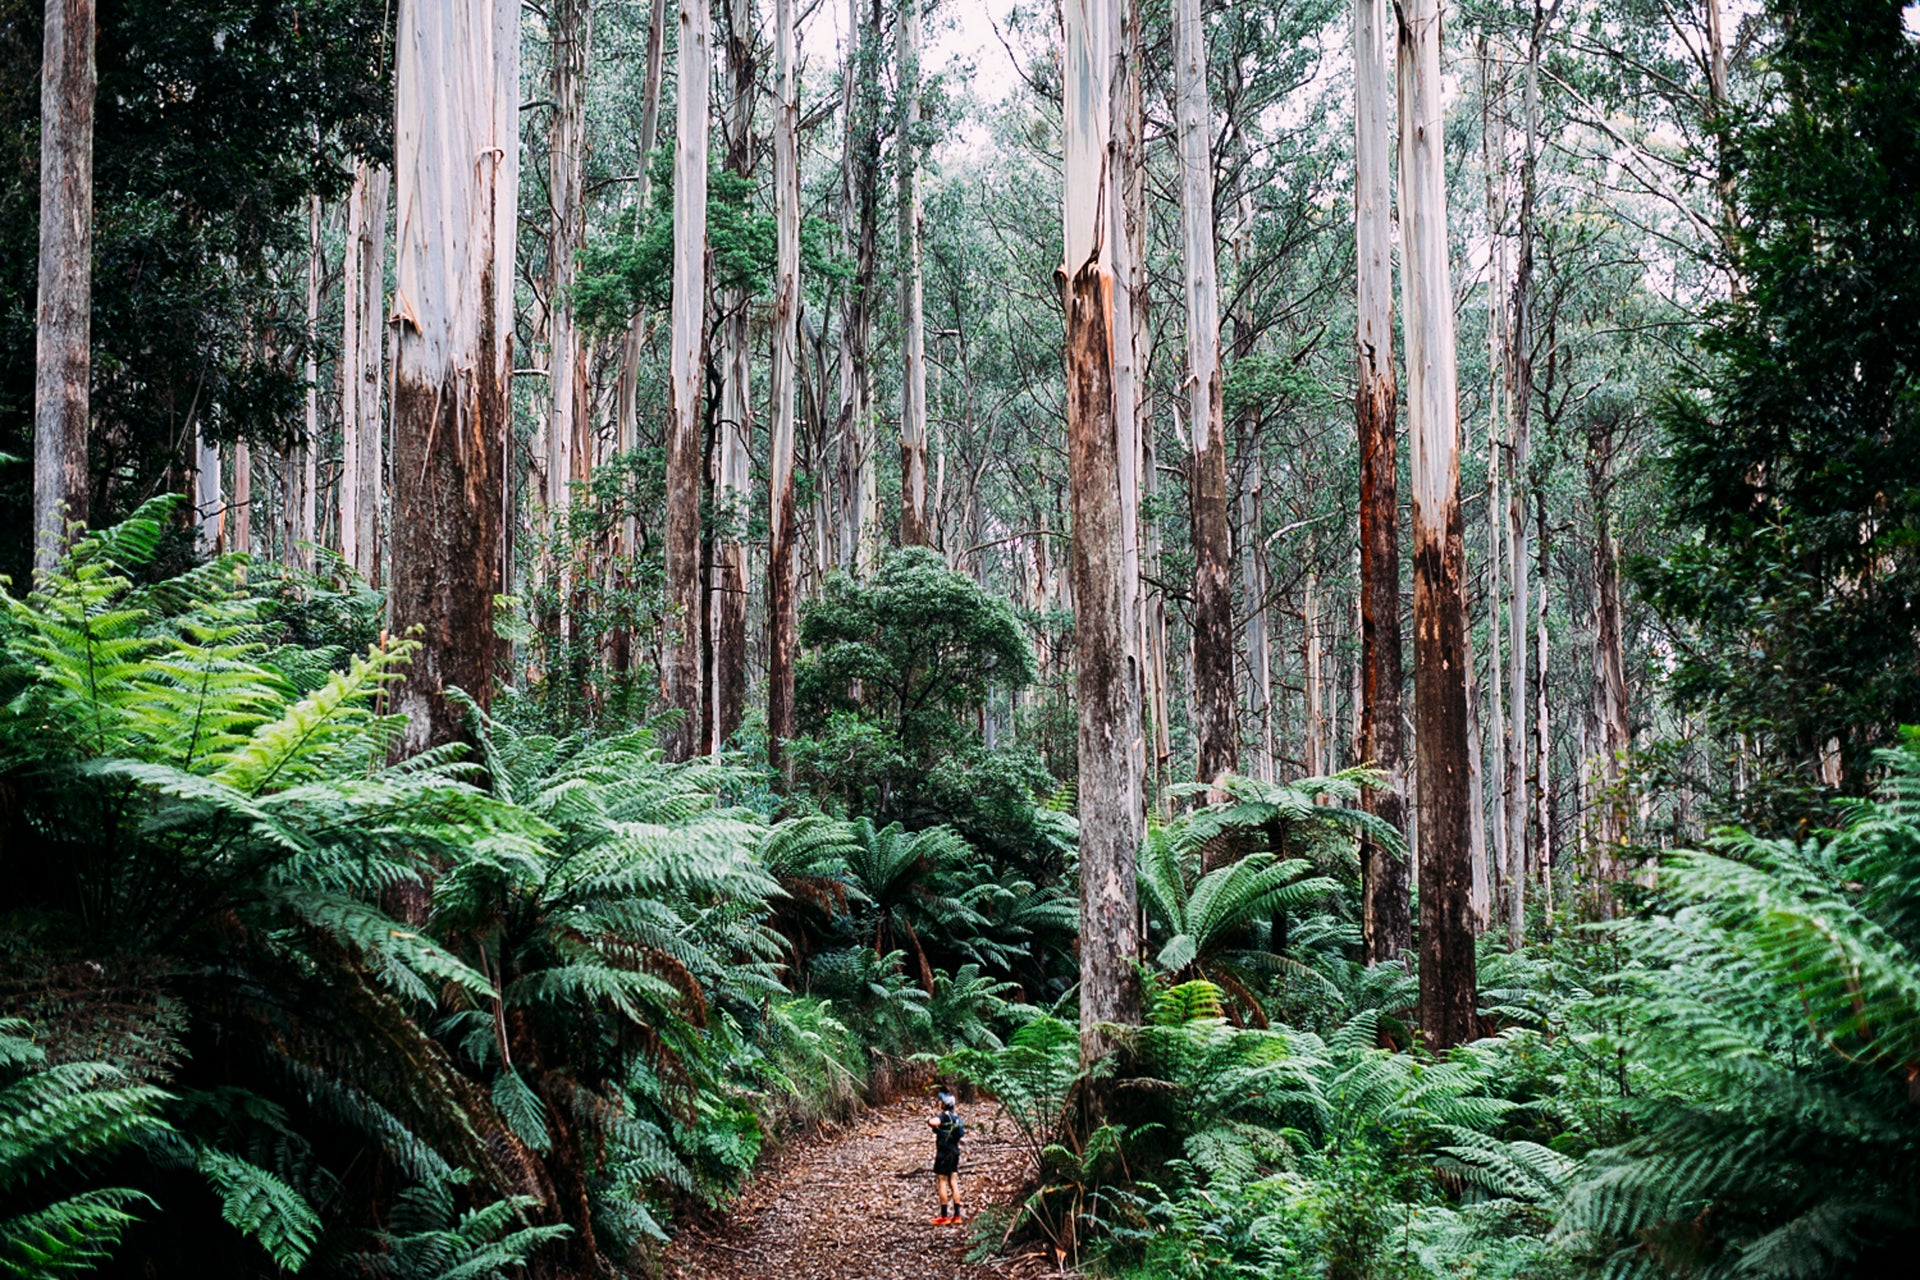 The mountain ash forests of the Victorian Central Highlands have existed for millions of years. The Great Forest National Park is an idea to protect them into the future. Photo: Cam Suttie.